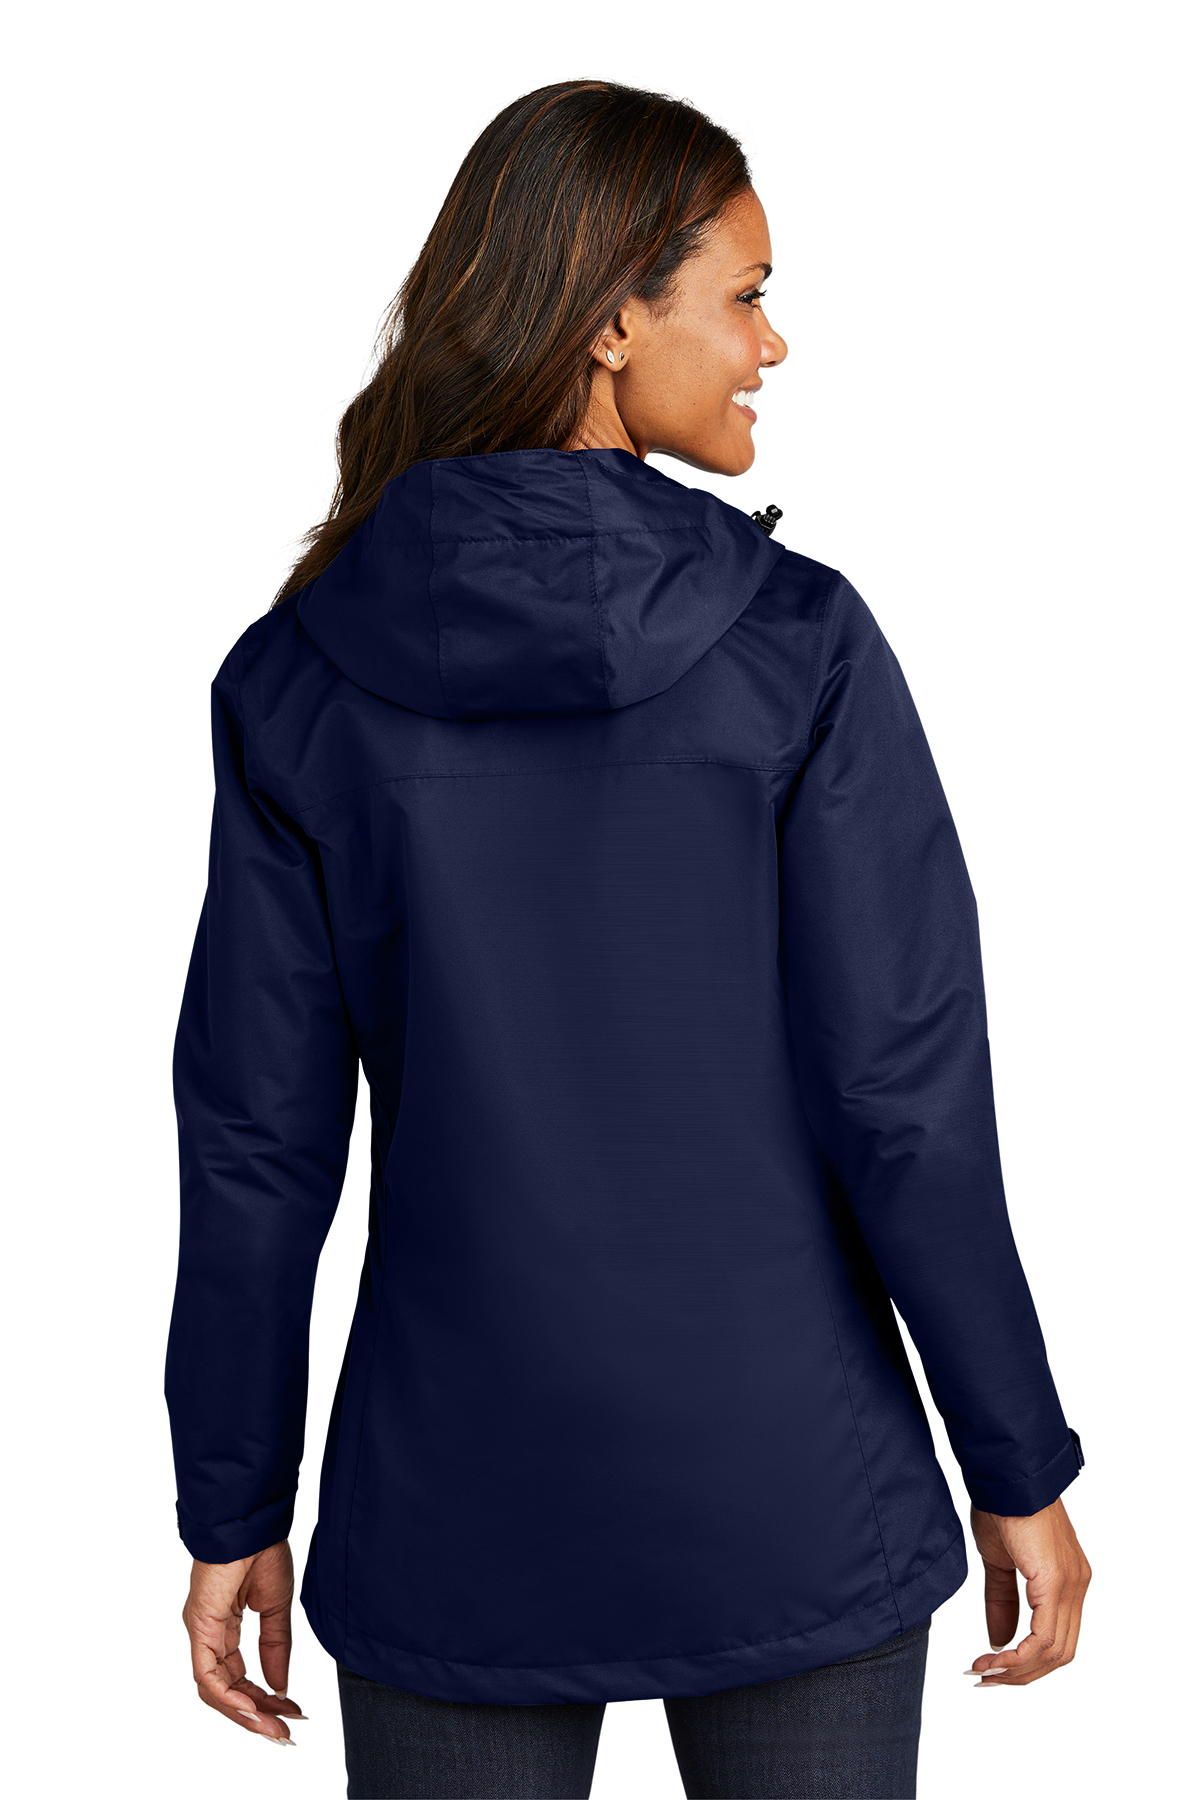 Port Authority Ladies All-Conditions Jacket | Product | Company Casuals